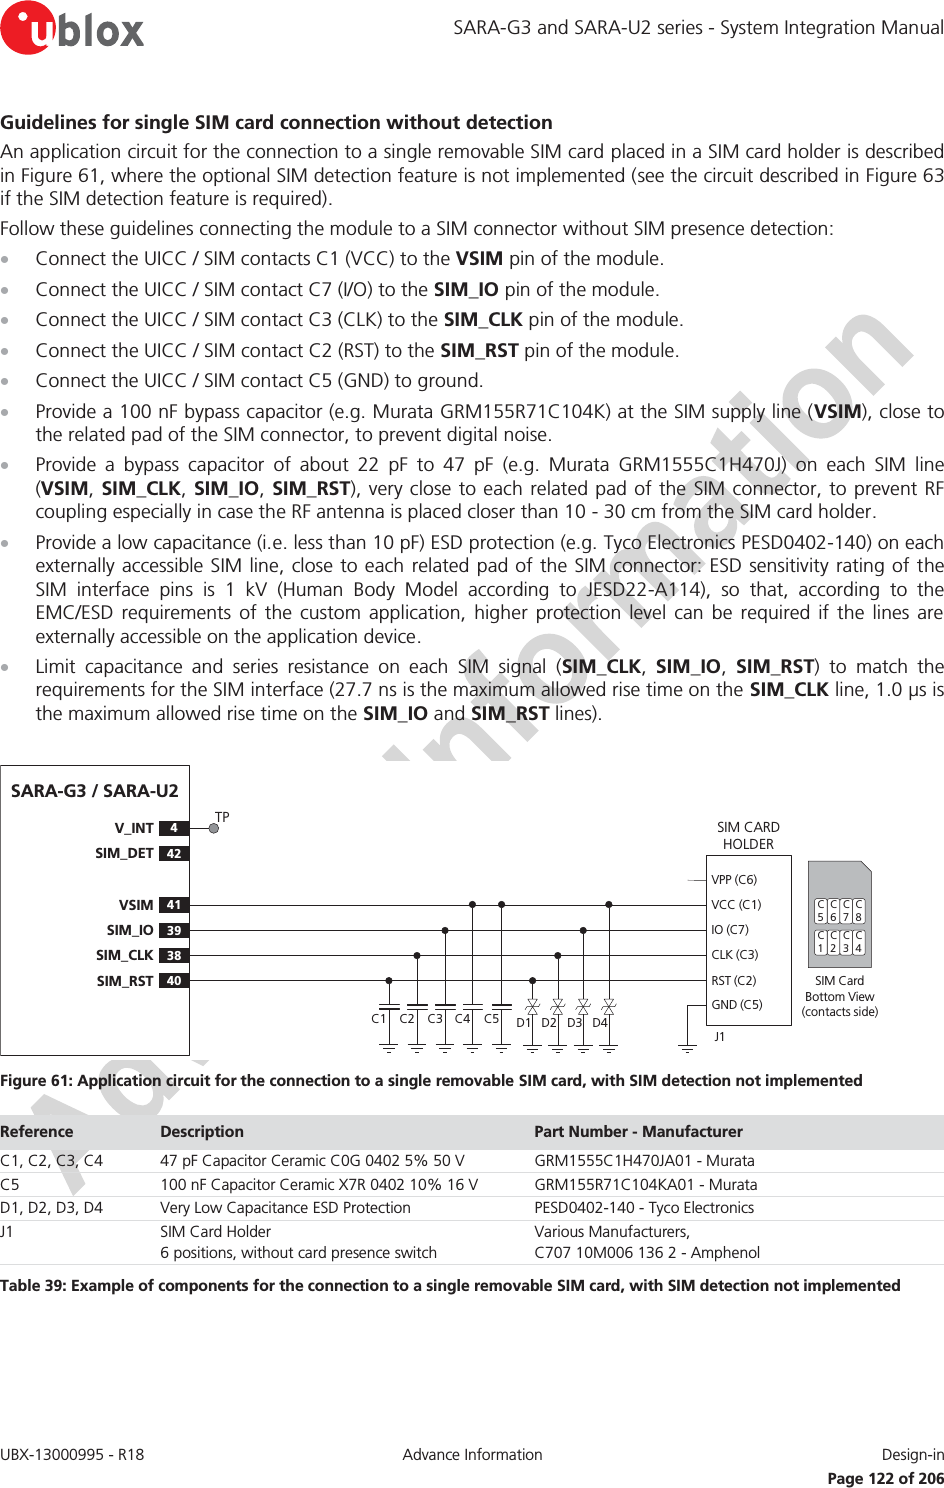 SARA-G3 and SARA-U2 series - System Integration Manual UBX-13000995 - R18  Advance Information  Design-in   Page 122 of 206 Guidelines for single SIM card connection without detection An application circuit for the connection to a single removable SIM card placed in a SIM card holder is described in Figure 61, where the optional SIM detection feature is not implemented (see the circuit described in Figure 63 if the SIM detection feature is required). Follow these guidelines connecting the module to a SIM connector without SIM presence detection: x Connect the UICC / SIM contacts C1 (VCC) to the VSIM pin of the module. x Connect the UICC / SIM contact C7 (I/O) to the SIM_IO pin of the module. x Connect the UICC / SIM contact C3 (CLK) to the SIM_CLK pin of the module. x Connect the UICC / SIM contact C2 (RST) to the SIM_RST pin of the module. x Connect the UICC / SIM contact C5 (GND) to ground. x Provide a 100 nF bypass capacitor (e.g. Murata GRM155R71C104K) at the SIM supply line (VSIM), close to the related pad of the SIM connector, to prevent digital noise. x Provide a bypass capacitor of about 22 pF to 47 pF (e.g. Murata GRM1555C1H470J) on each SIM line (VSIM, SIM_CLK, SIM_IO,  SIM_RST), very close to each related pad of the SIM connector, to prevent RF coupling especially in case the RF antenna is placed closer than 10 - 30 cm from the SIM card holder. x Provide a low capacitance (i.e. less than 10 pF) ESD protection (e.g. Tyco Electronics PESD0402-140) on each externally accessible SIM line, close to each related pad of the SIM connector: ESD sensitivity rating of the SIM interface pins is 1 kV (Human Body Model according to JESD22-A114), so that, according to the EMC/ESD requirements of the custom application, higher protection level can be required if the lines are externally accessible on the application device. x Limit capacitance and series resistance on each SIM signal (SIM_CLK,  SIM_IO,  SIM_RST) to match the requirements for the SIM interface (27.7 ns is the maximum allowed rise time on the SIM_CLK line, 1.0 μs is the maximum allowed rise time on the SIM_IO and SIM_RST lines).  SARA-G3 / SARA-U241VSIM39SIM_IO38SIM_CLK40SIM_RST4V_INT42SIM_DETSIM CARD HOLDERC5C6C7C1C2C3SIM Card Bottom View (contacts side)C1VPP (C6)VCC (C1)IO (C7)CLK (C3)RST (C2)GND (C5)C2 C3 C5J1C4 D1 D2 D3 D4C8C4TP Figure 61: Application circuit for the connection to a single removable SIM card, with SIM detection not implemented Reference  Description  Part Number - Manufacturer C1, C2, C3, C4 47 pF Capacitor Ceramic C0G 0402 5% 50 V GRM1555C1H470JA01 - Murata C5 100 nF Capacitor Ceramic X7R 0402 10% 16 V GRM155R71C104KA01 - Murata D1, D2, D3, D4 Very Low Capacitance ESD Protection PESD0402-140 - Tyco Electronics  J1 SIM Card Holder 6 positions, without card presence switch Various Manufacturers, C707 10M006 136 2 - Amphenol Table 39: Example of components for the connection to a single removable SIM card, with SIM detection not implemented  